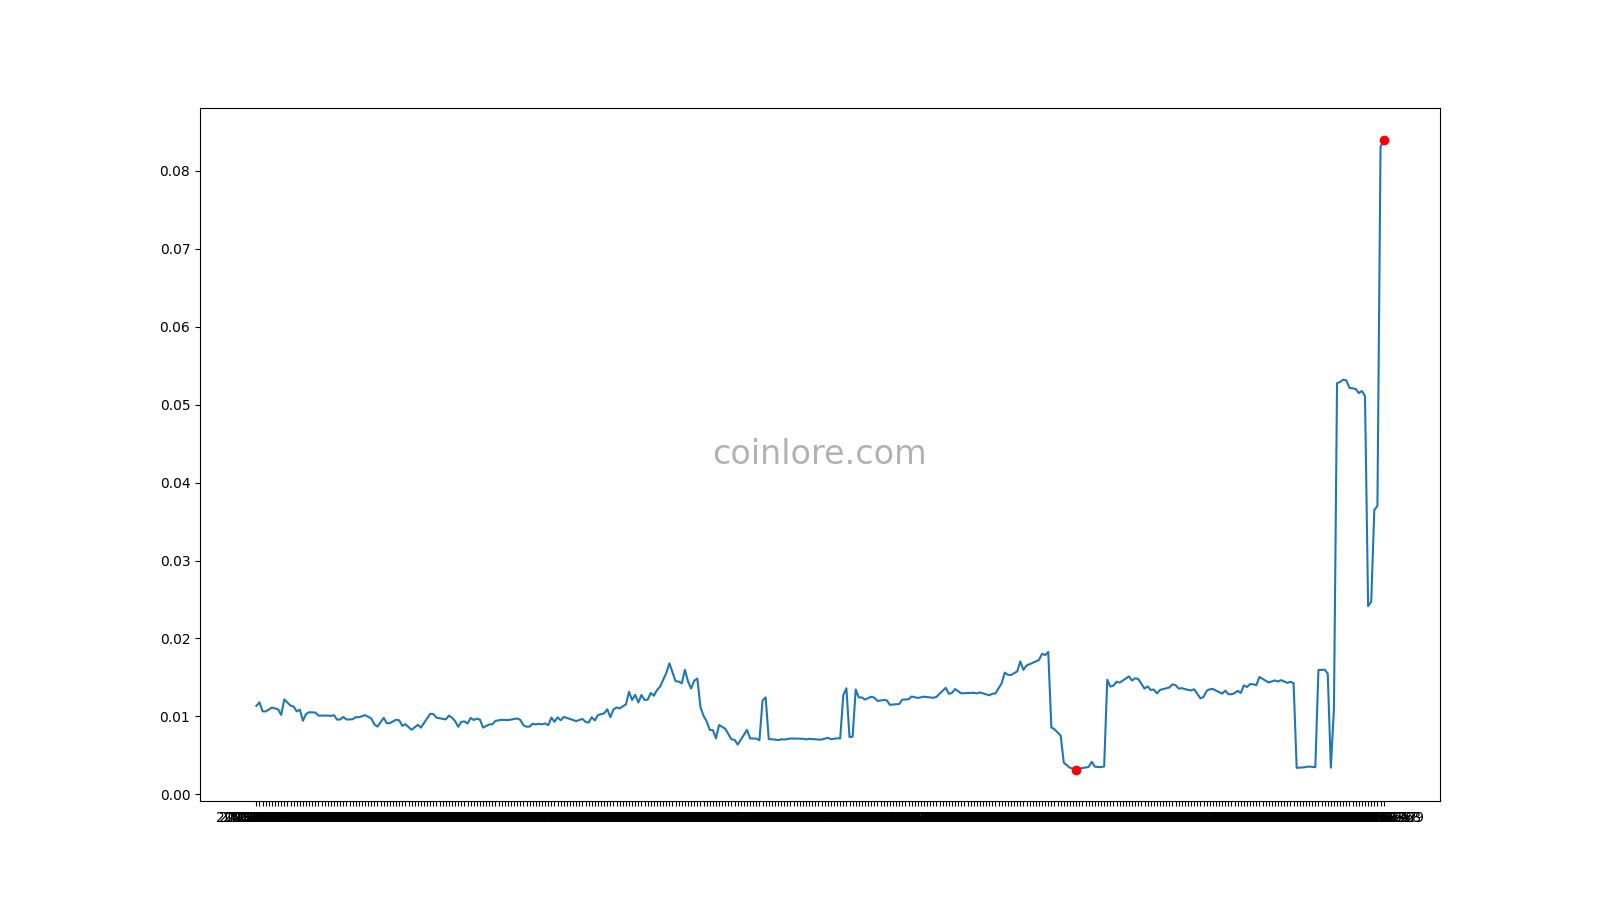 GameCredits Price History Chart - All GAME Historical Data